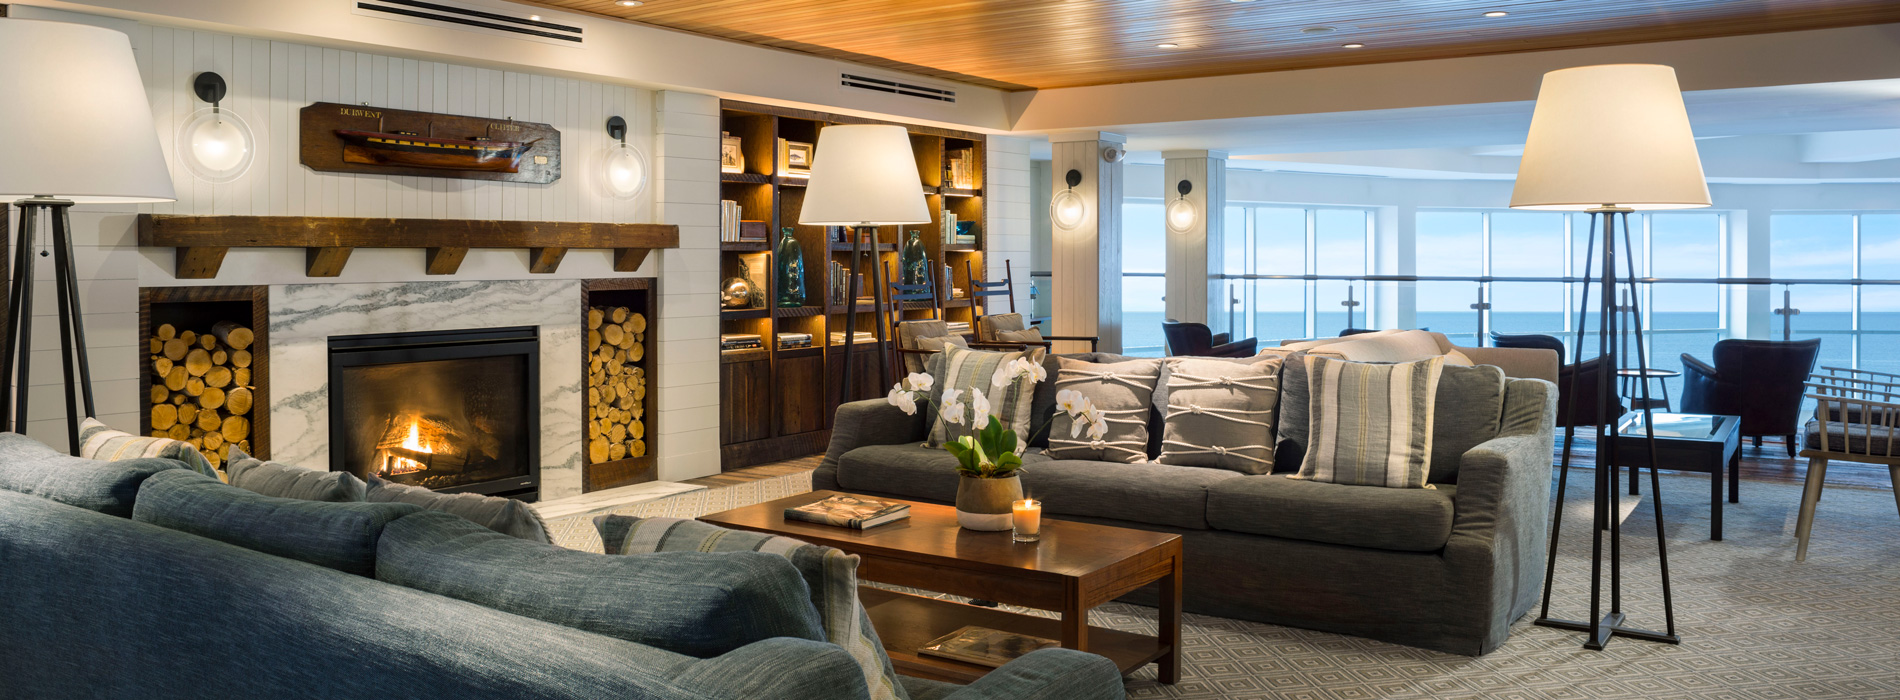 The lobby at Cliff House Resort in Maine with cozy couches surrounding a wood burning fireplace and walls of books with the ocean revealed in the wall of windows beyond.